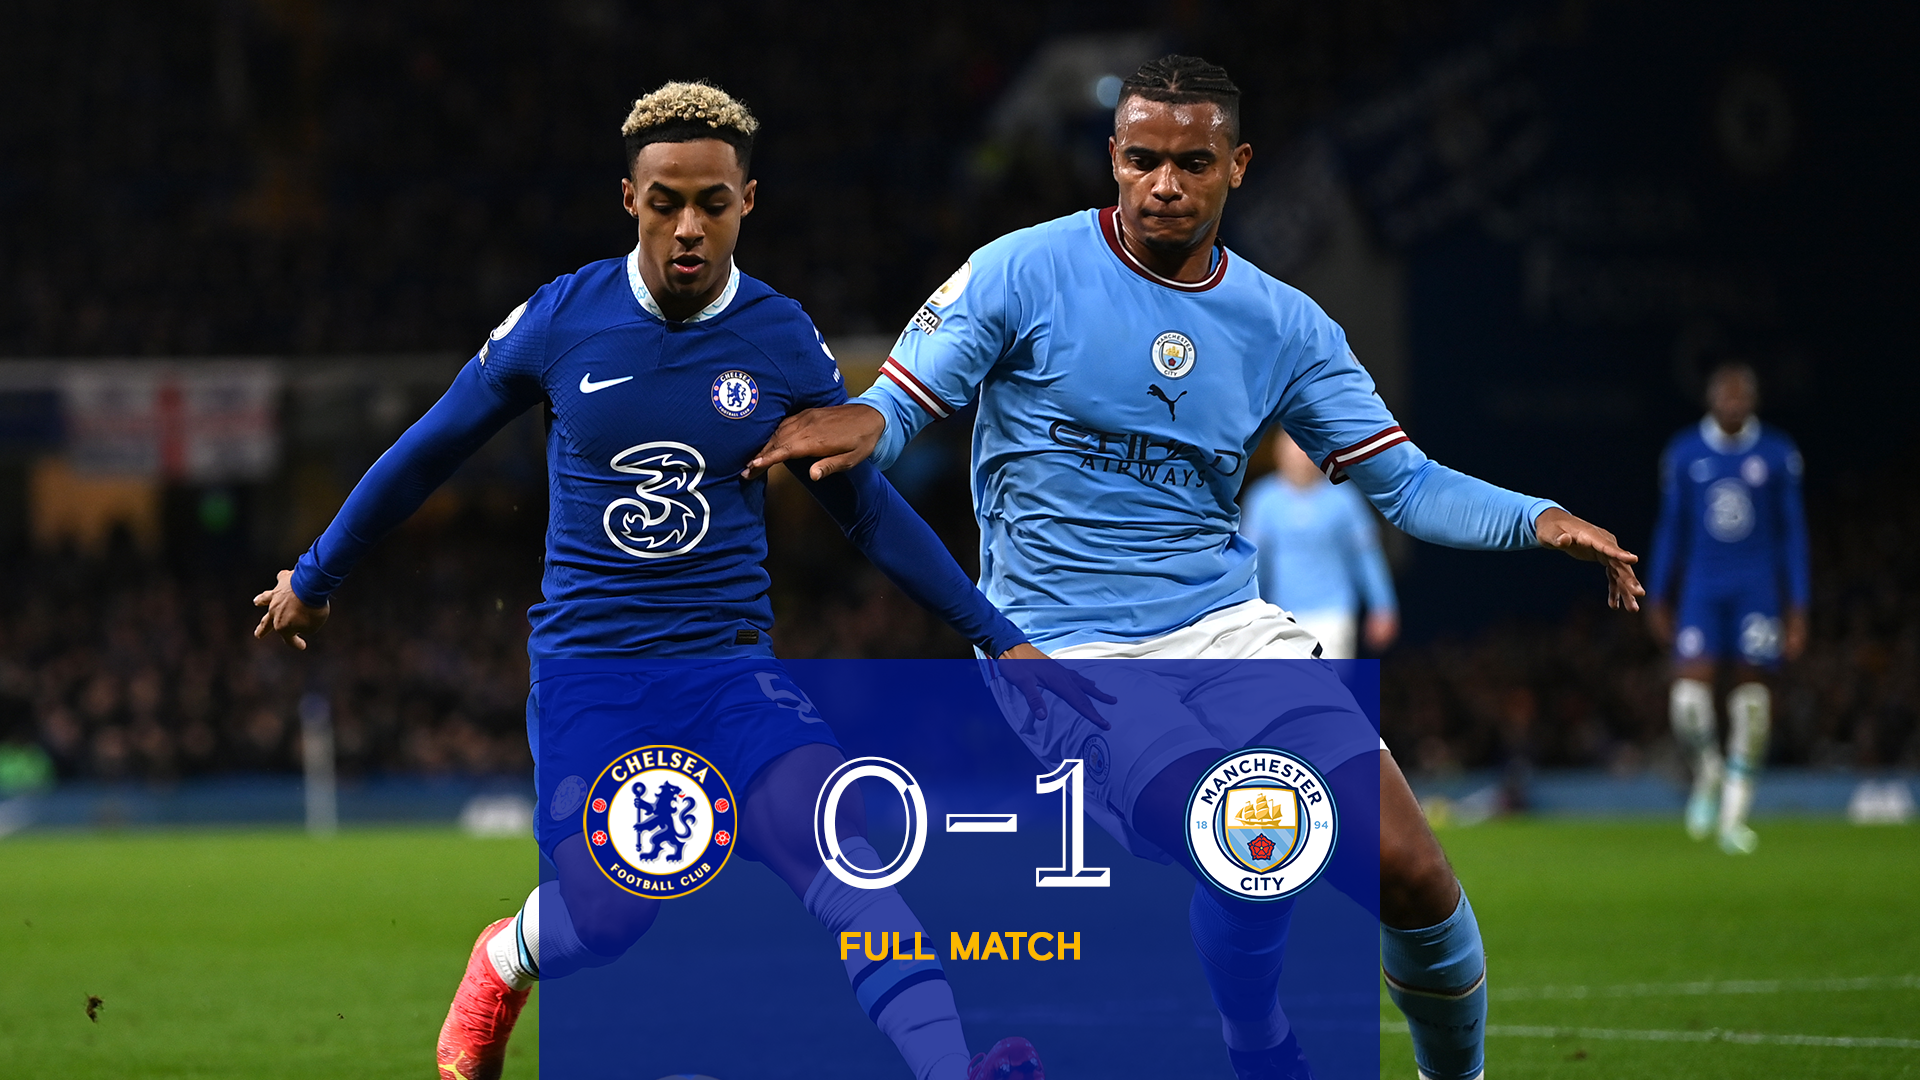 Full match Chelsea 0-1 Man City Video Official Site Chelsea Football Club